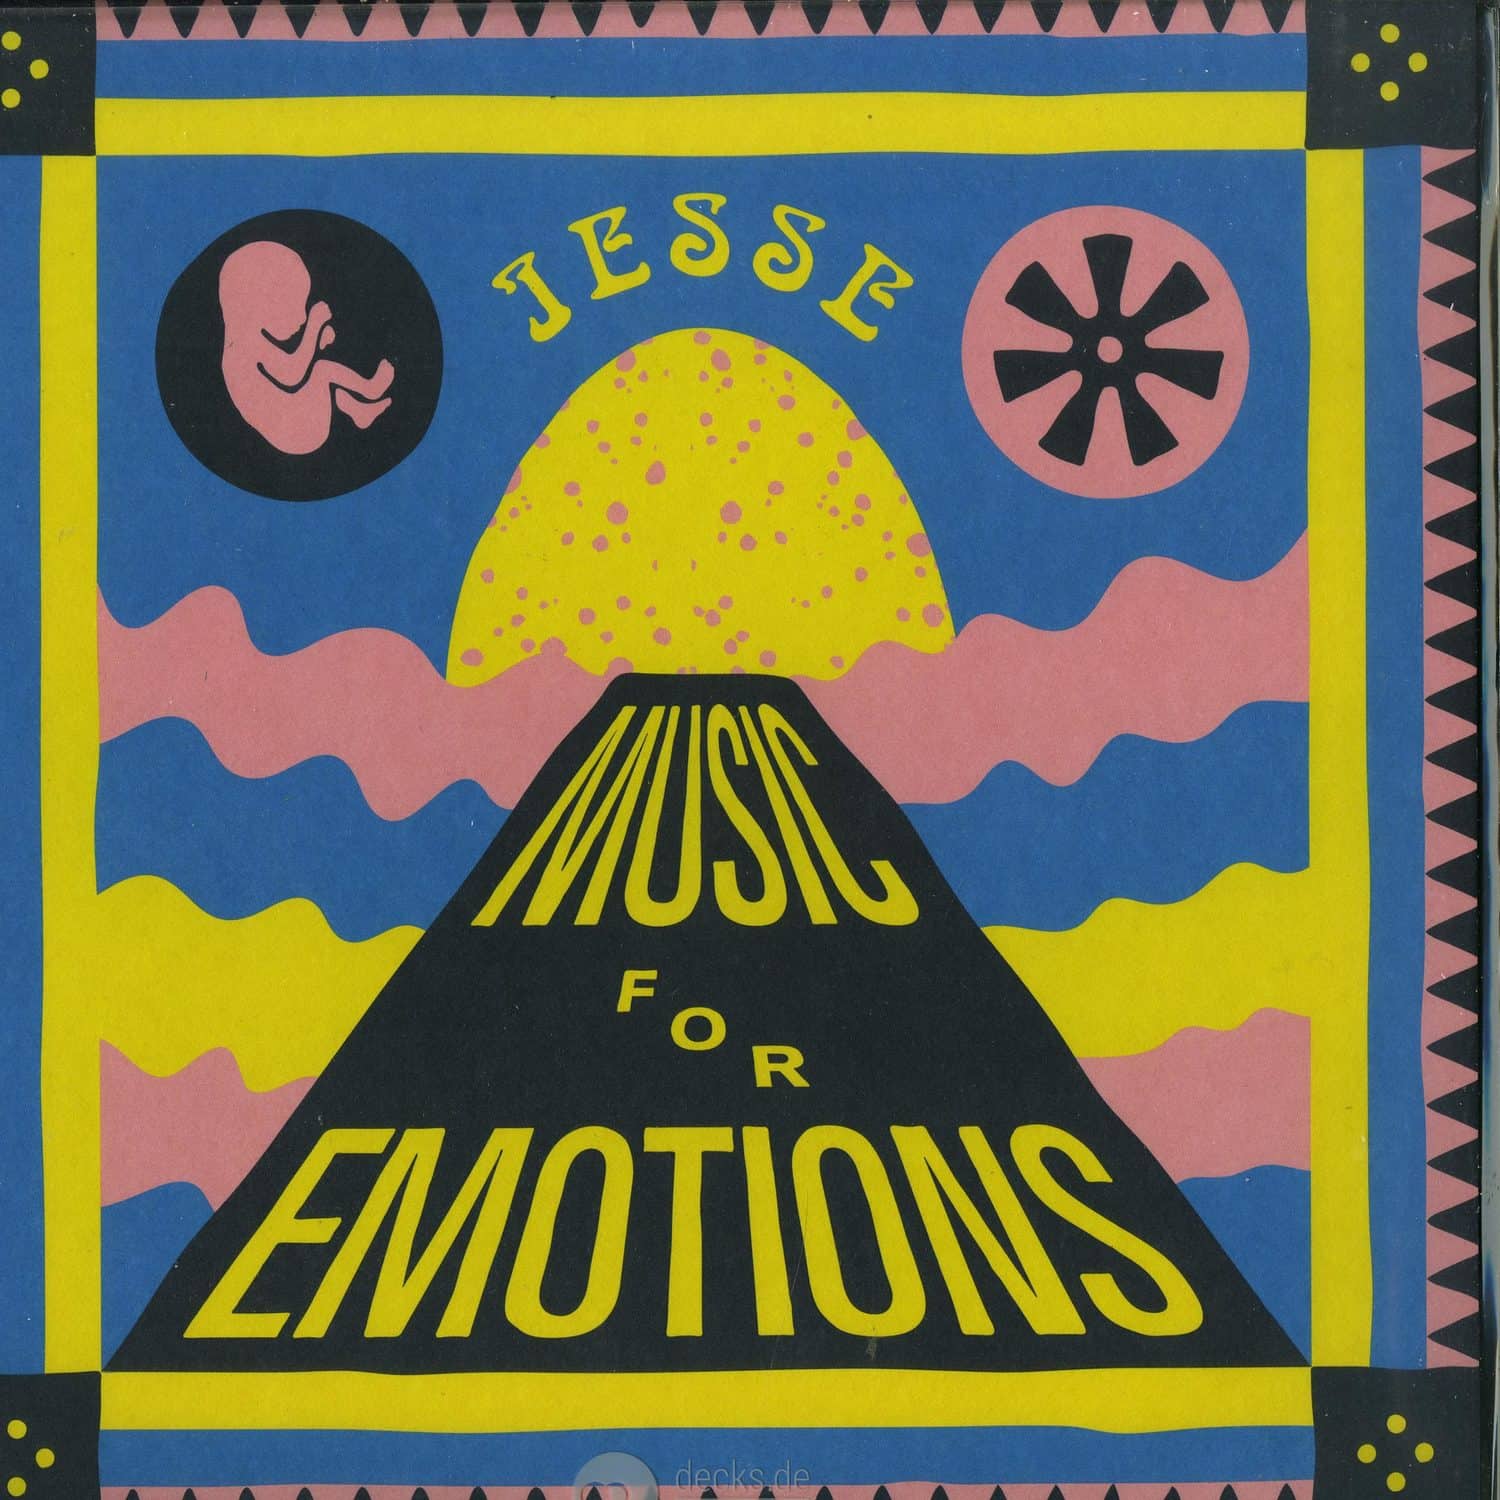 Jesse - MUSIC FOR EMOTIONS